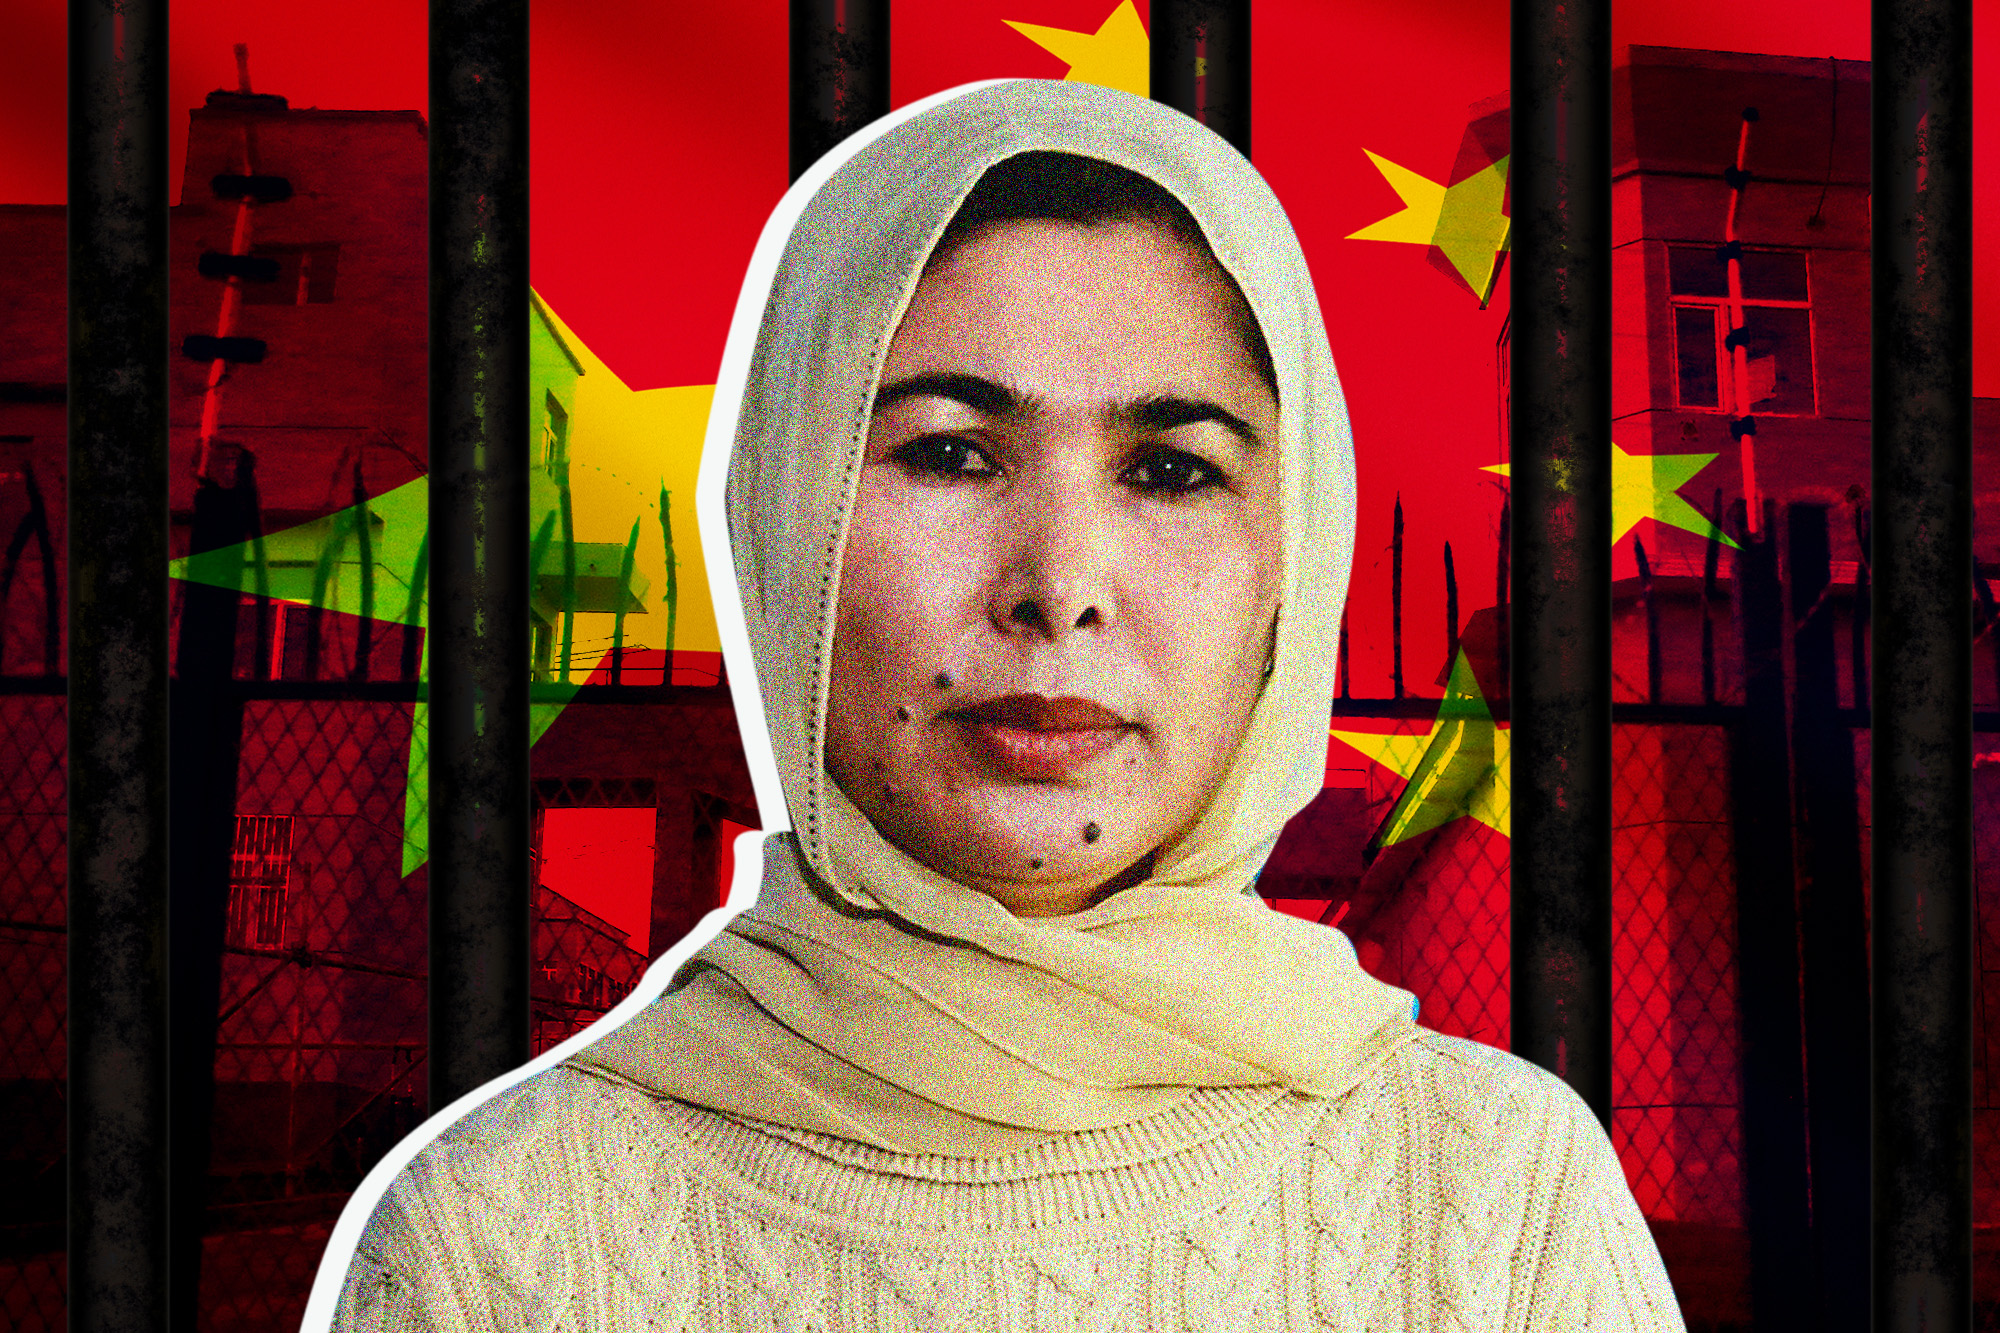 Uyghur women in China labor camps recall horror of rape, forced sterilization